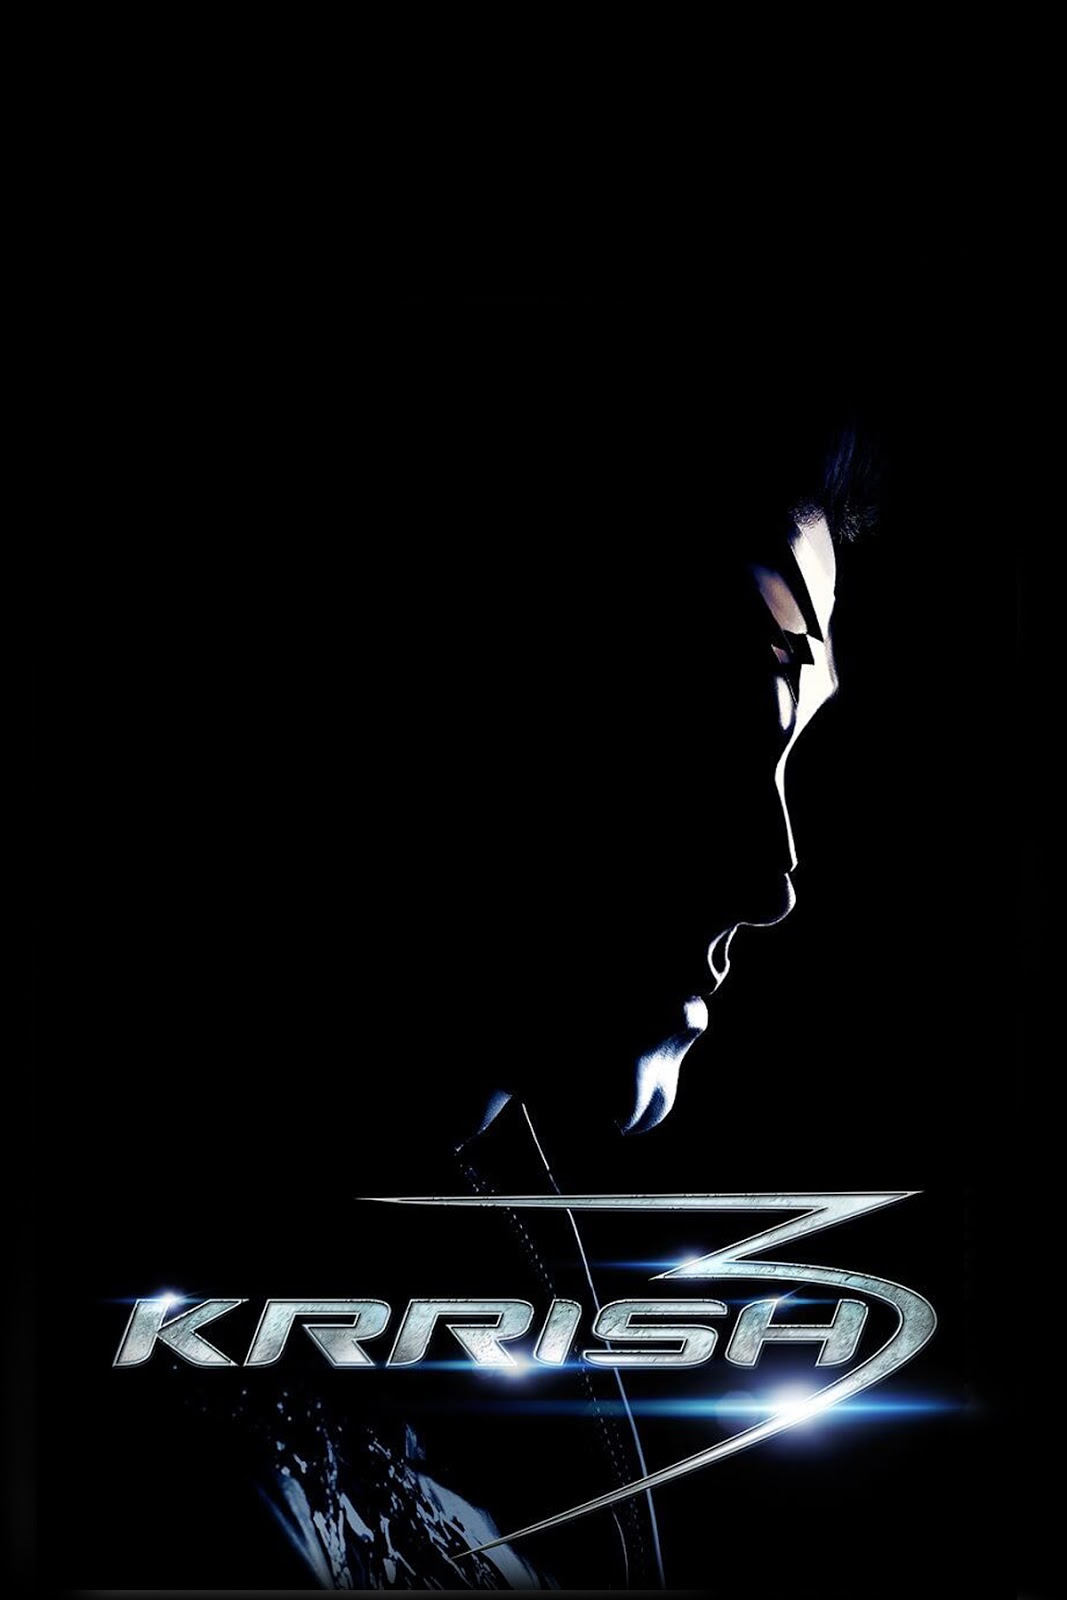 Krrish-3 Latest HD wallpapers 1080p | HD Wallpapers (High Definition ...